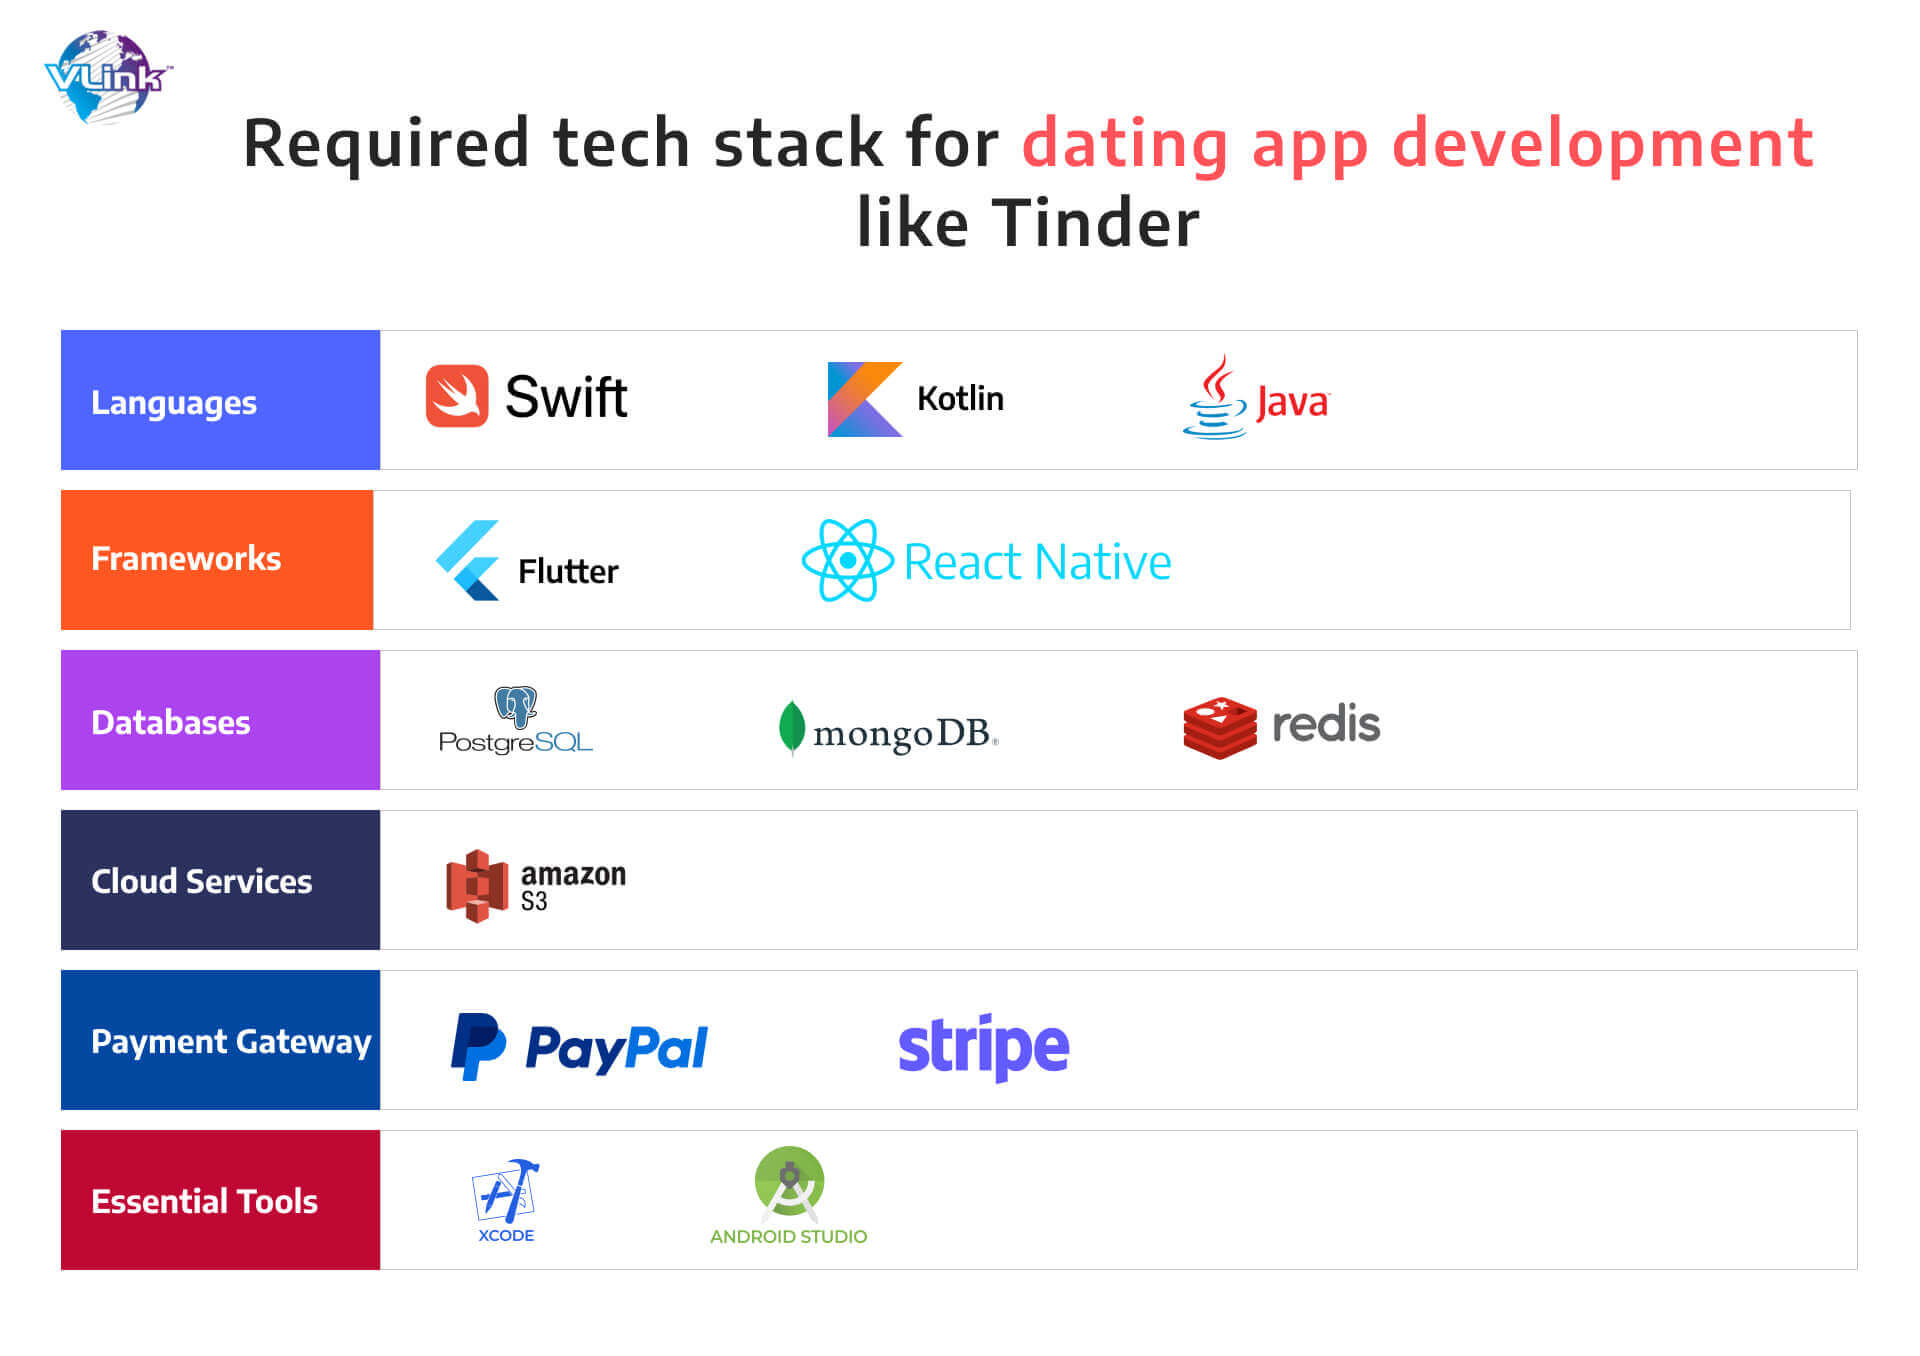 Required tech stack for dating app development like Tinder